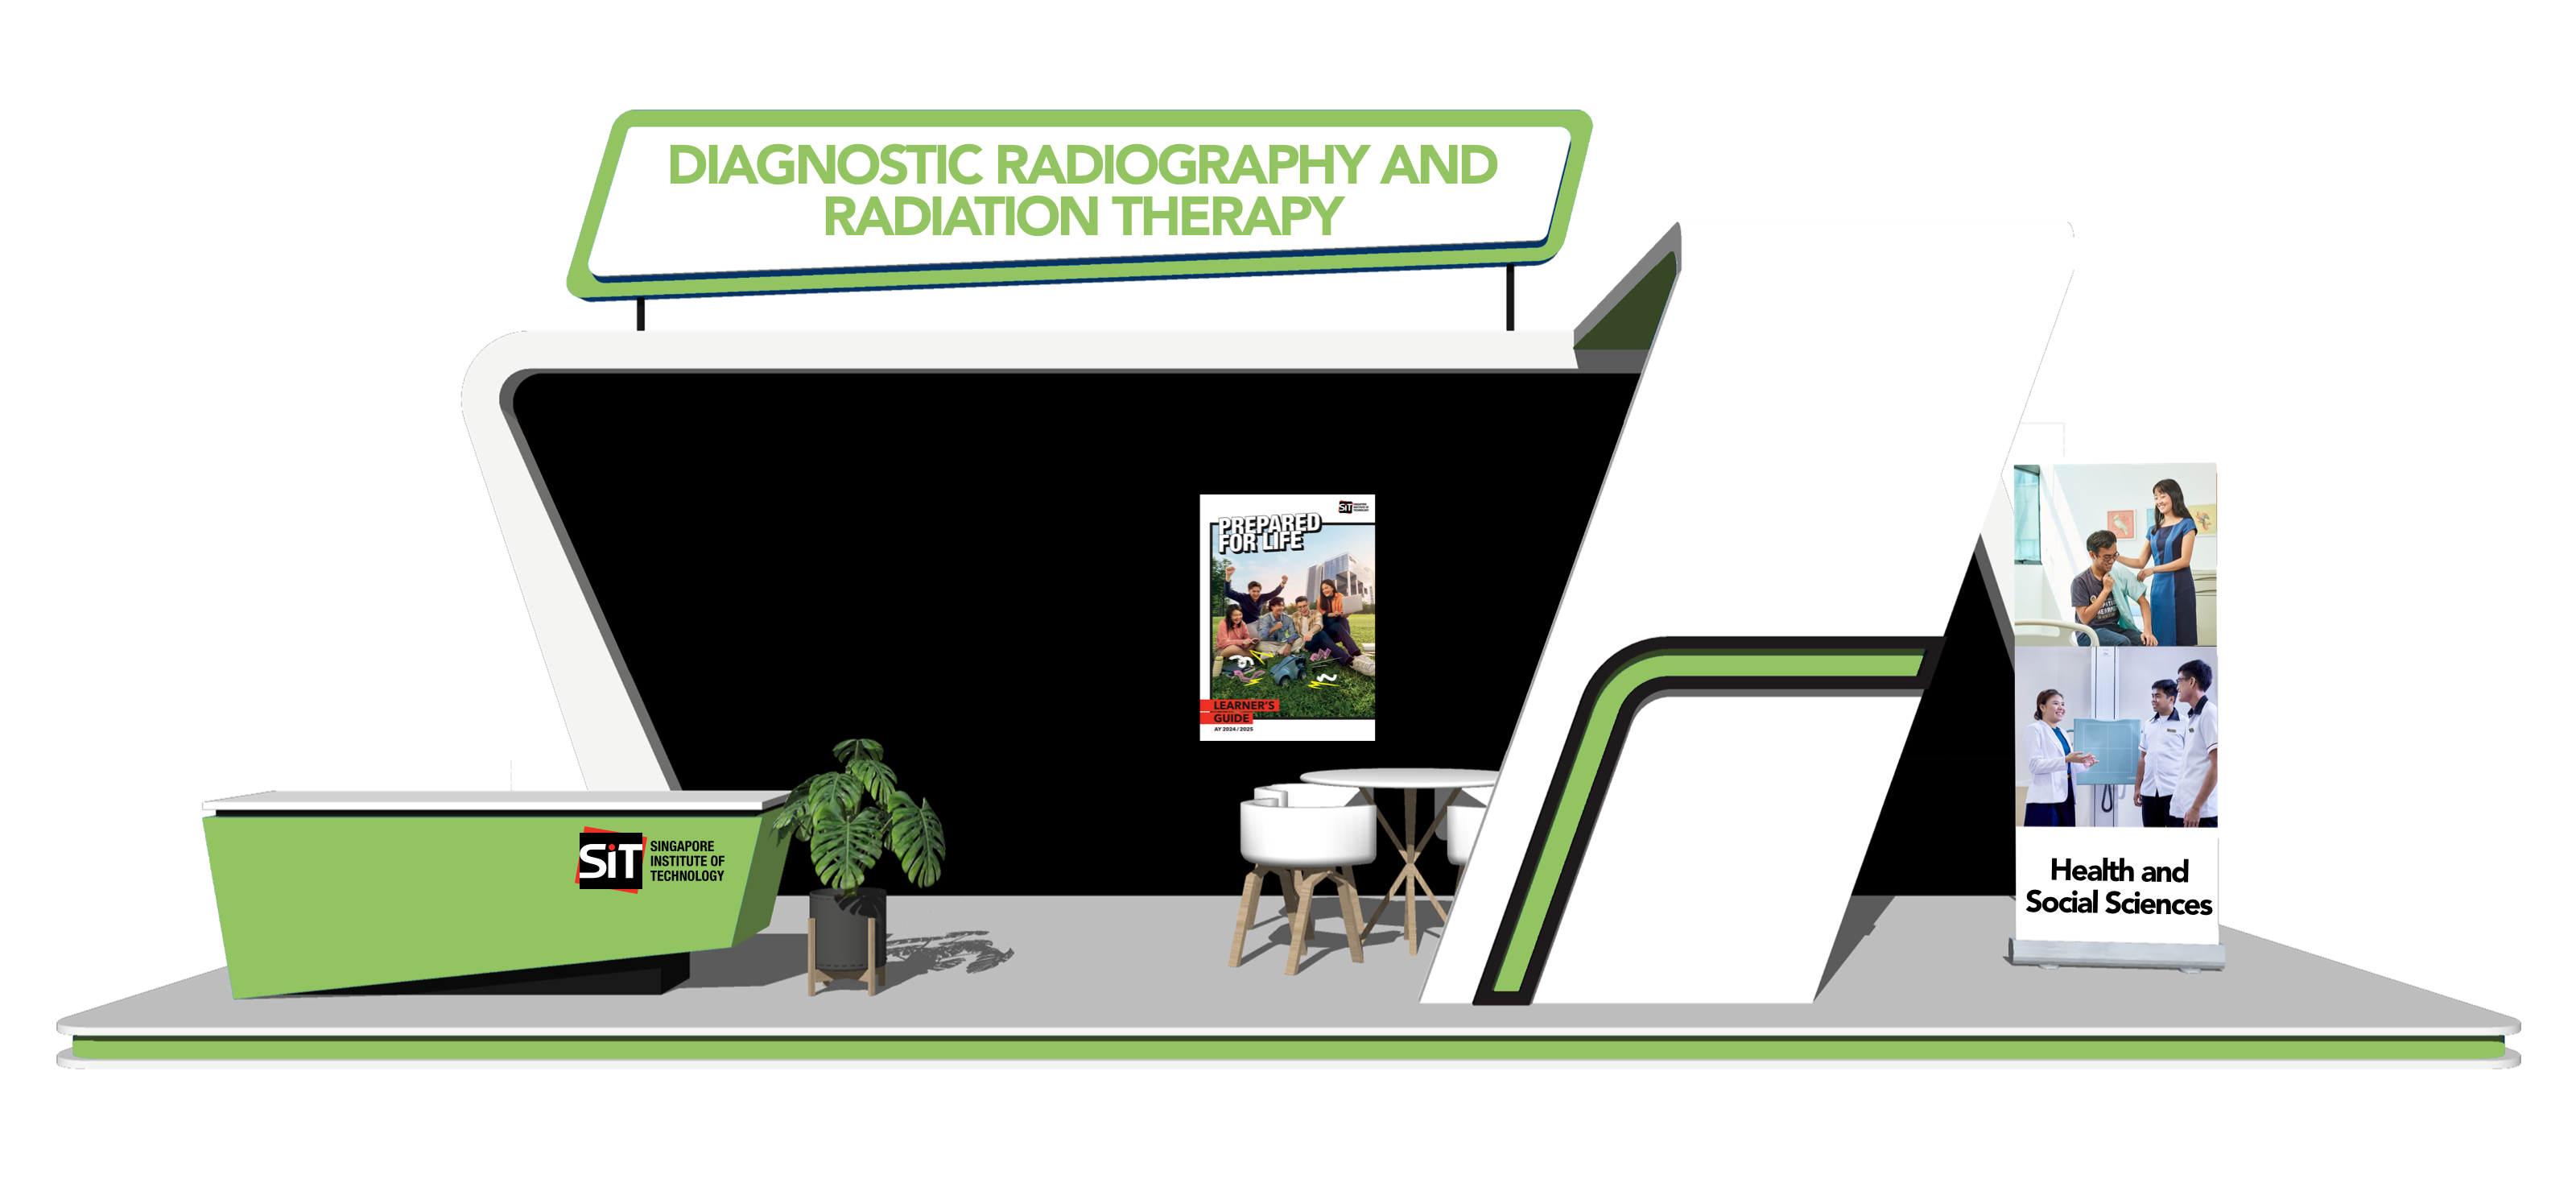 Diagnostic Radiography and Radiation Therapy